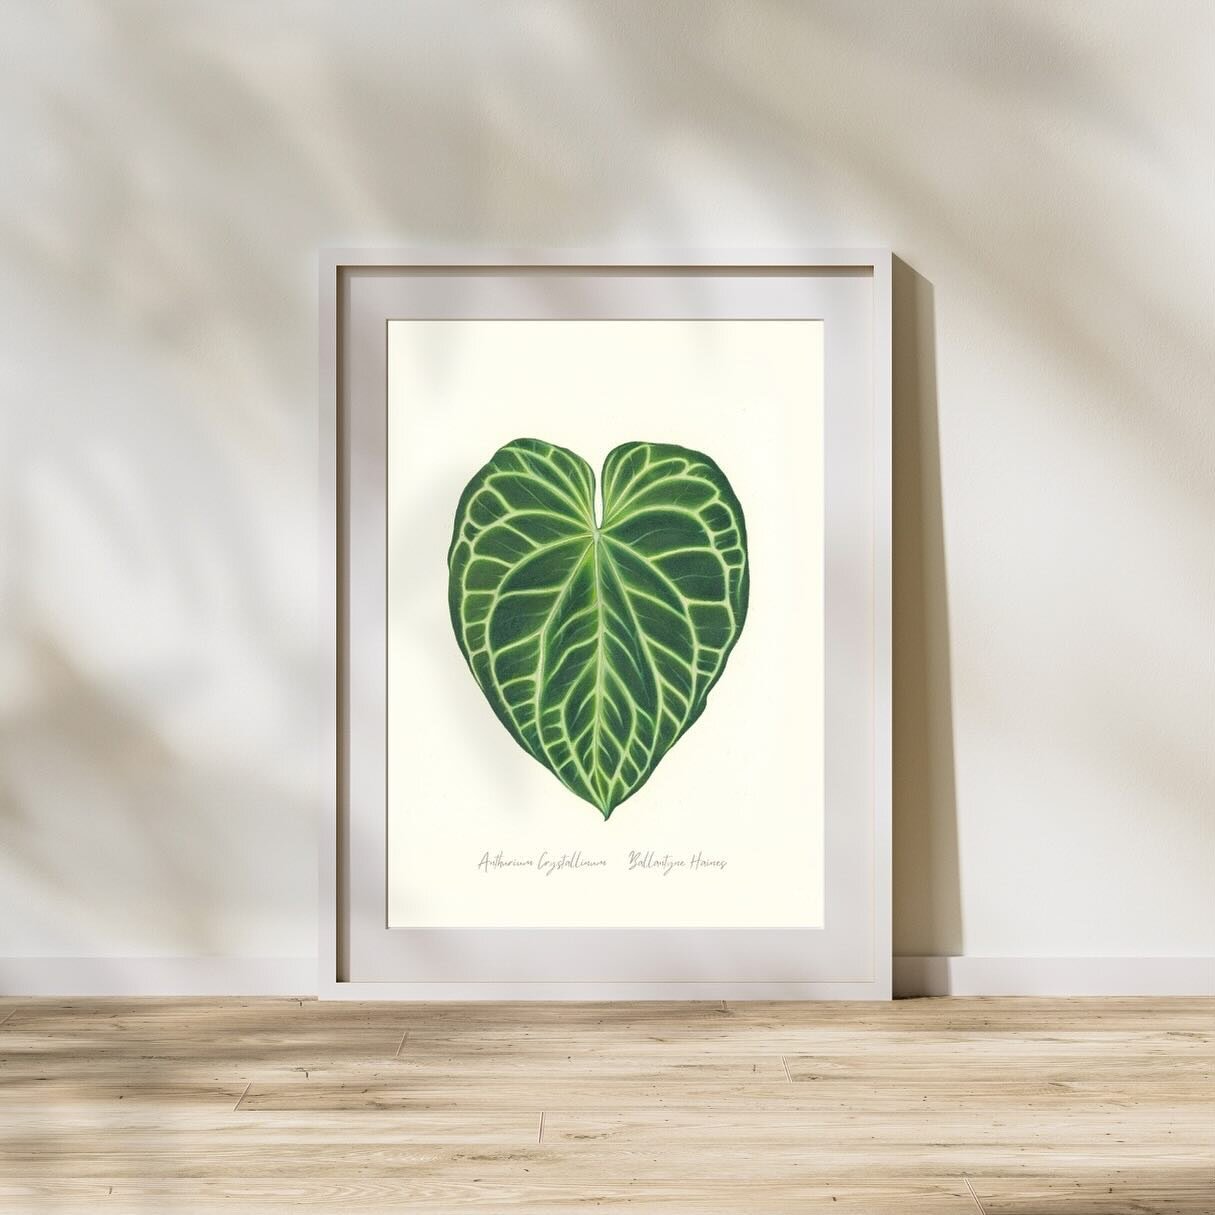 A cheeky wee Anthurium crystallinum for a Friday afternoon. Xmas sale live now! (www.ballantynehaines.com) link in bio 🥳